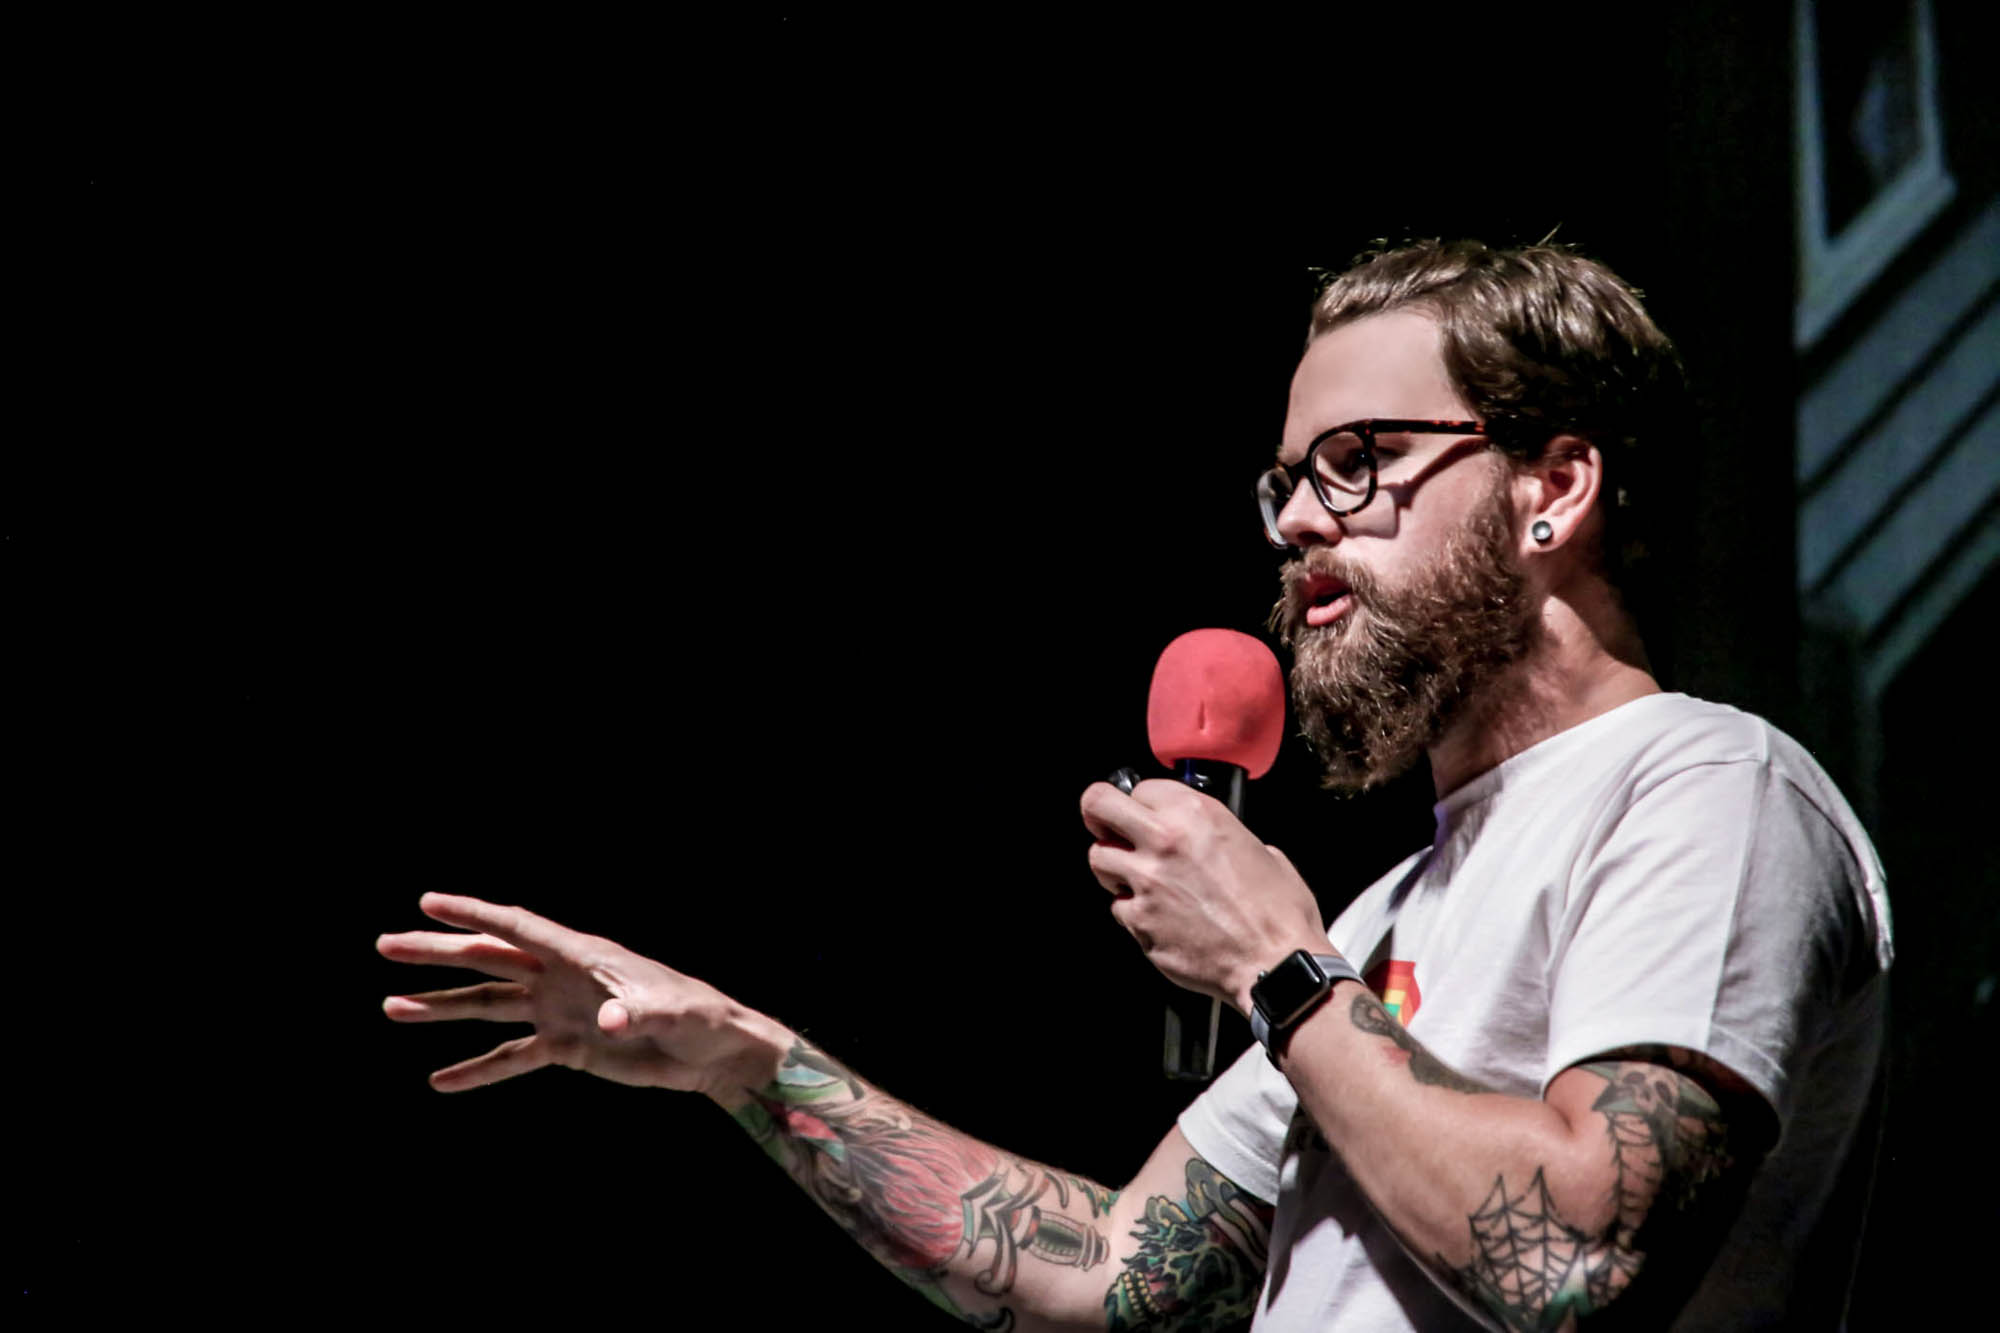 Bespoke Photography for Professional Speaker Chris Marr at MarketedLive - Shot by © Laura Pearman Creative